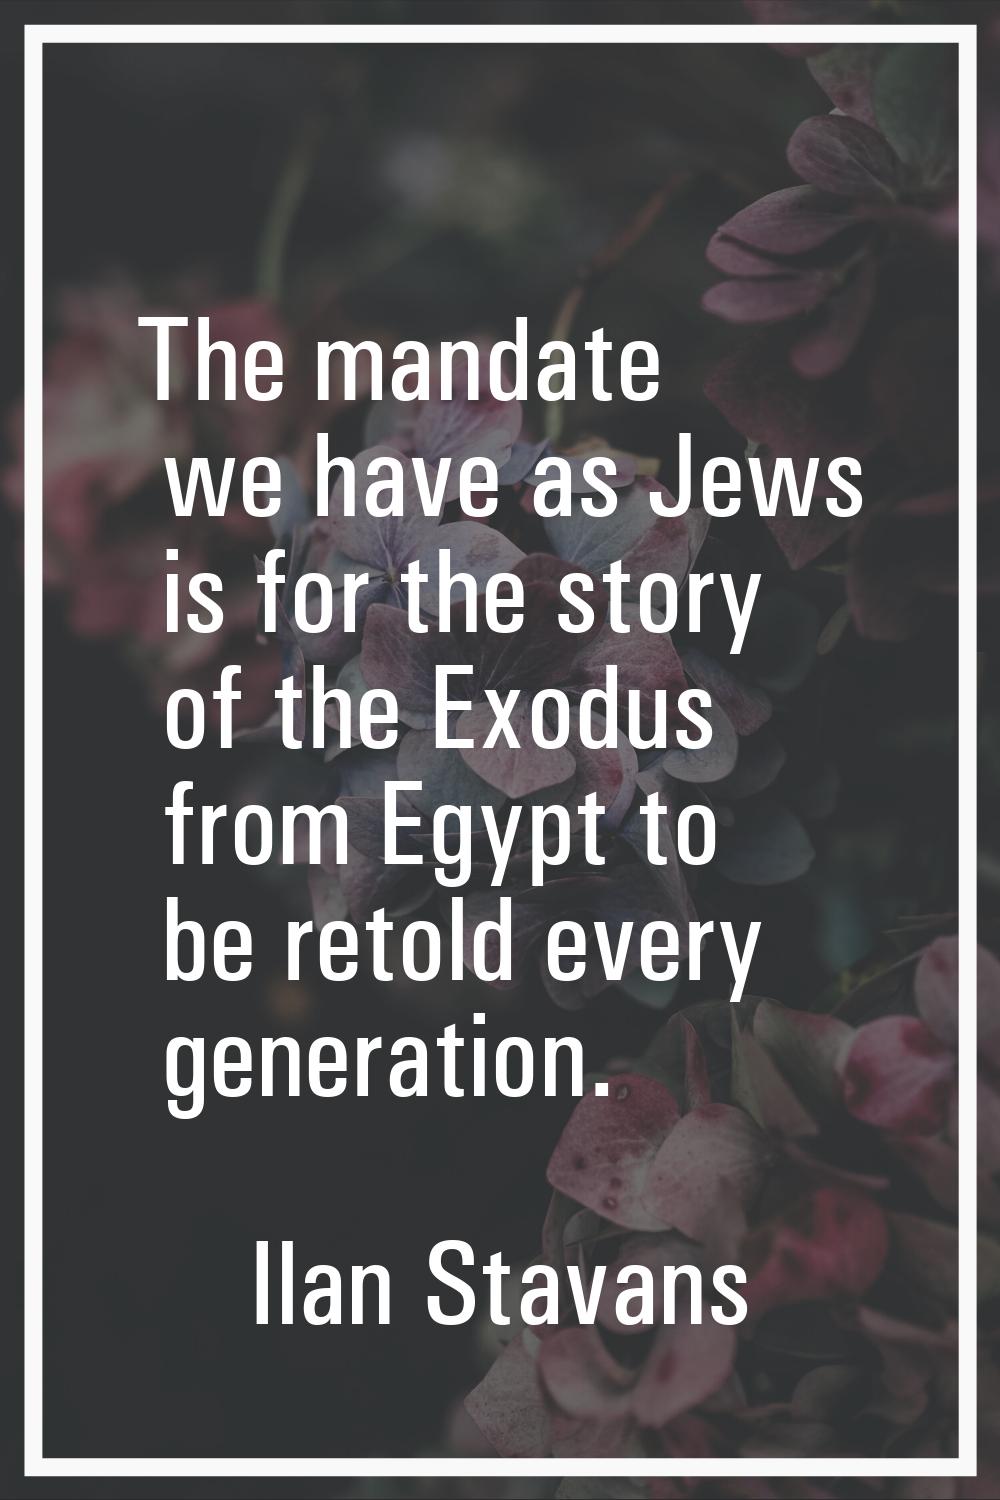 The mandate we have as Jews is for the story of the Exodus from Egypt to be retold every generation